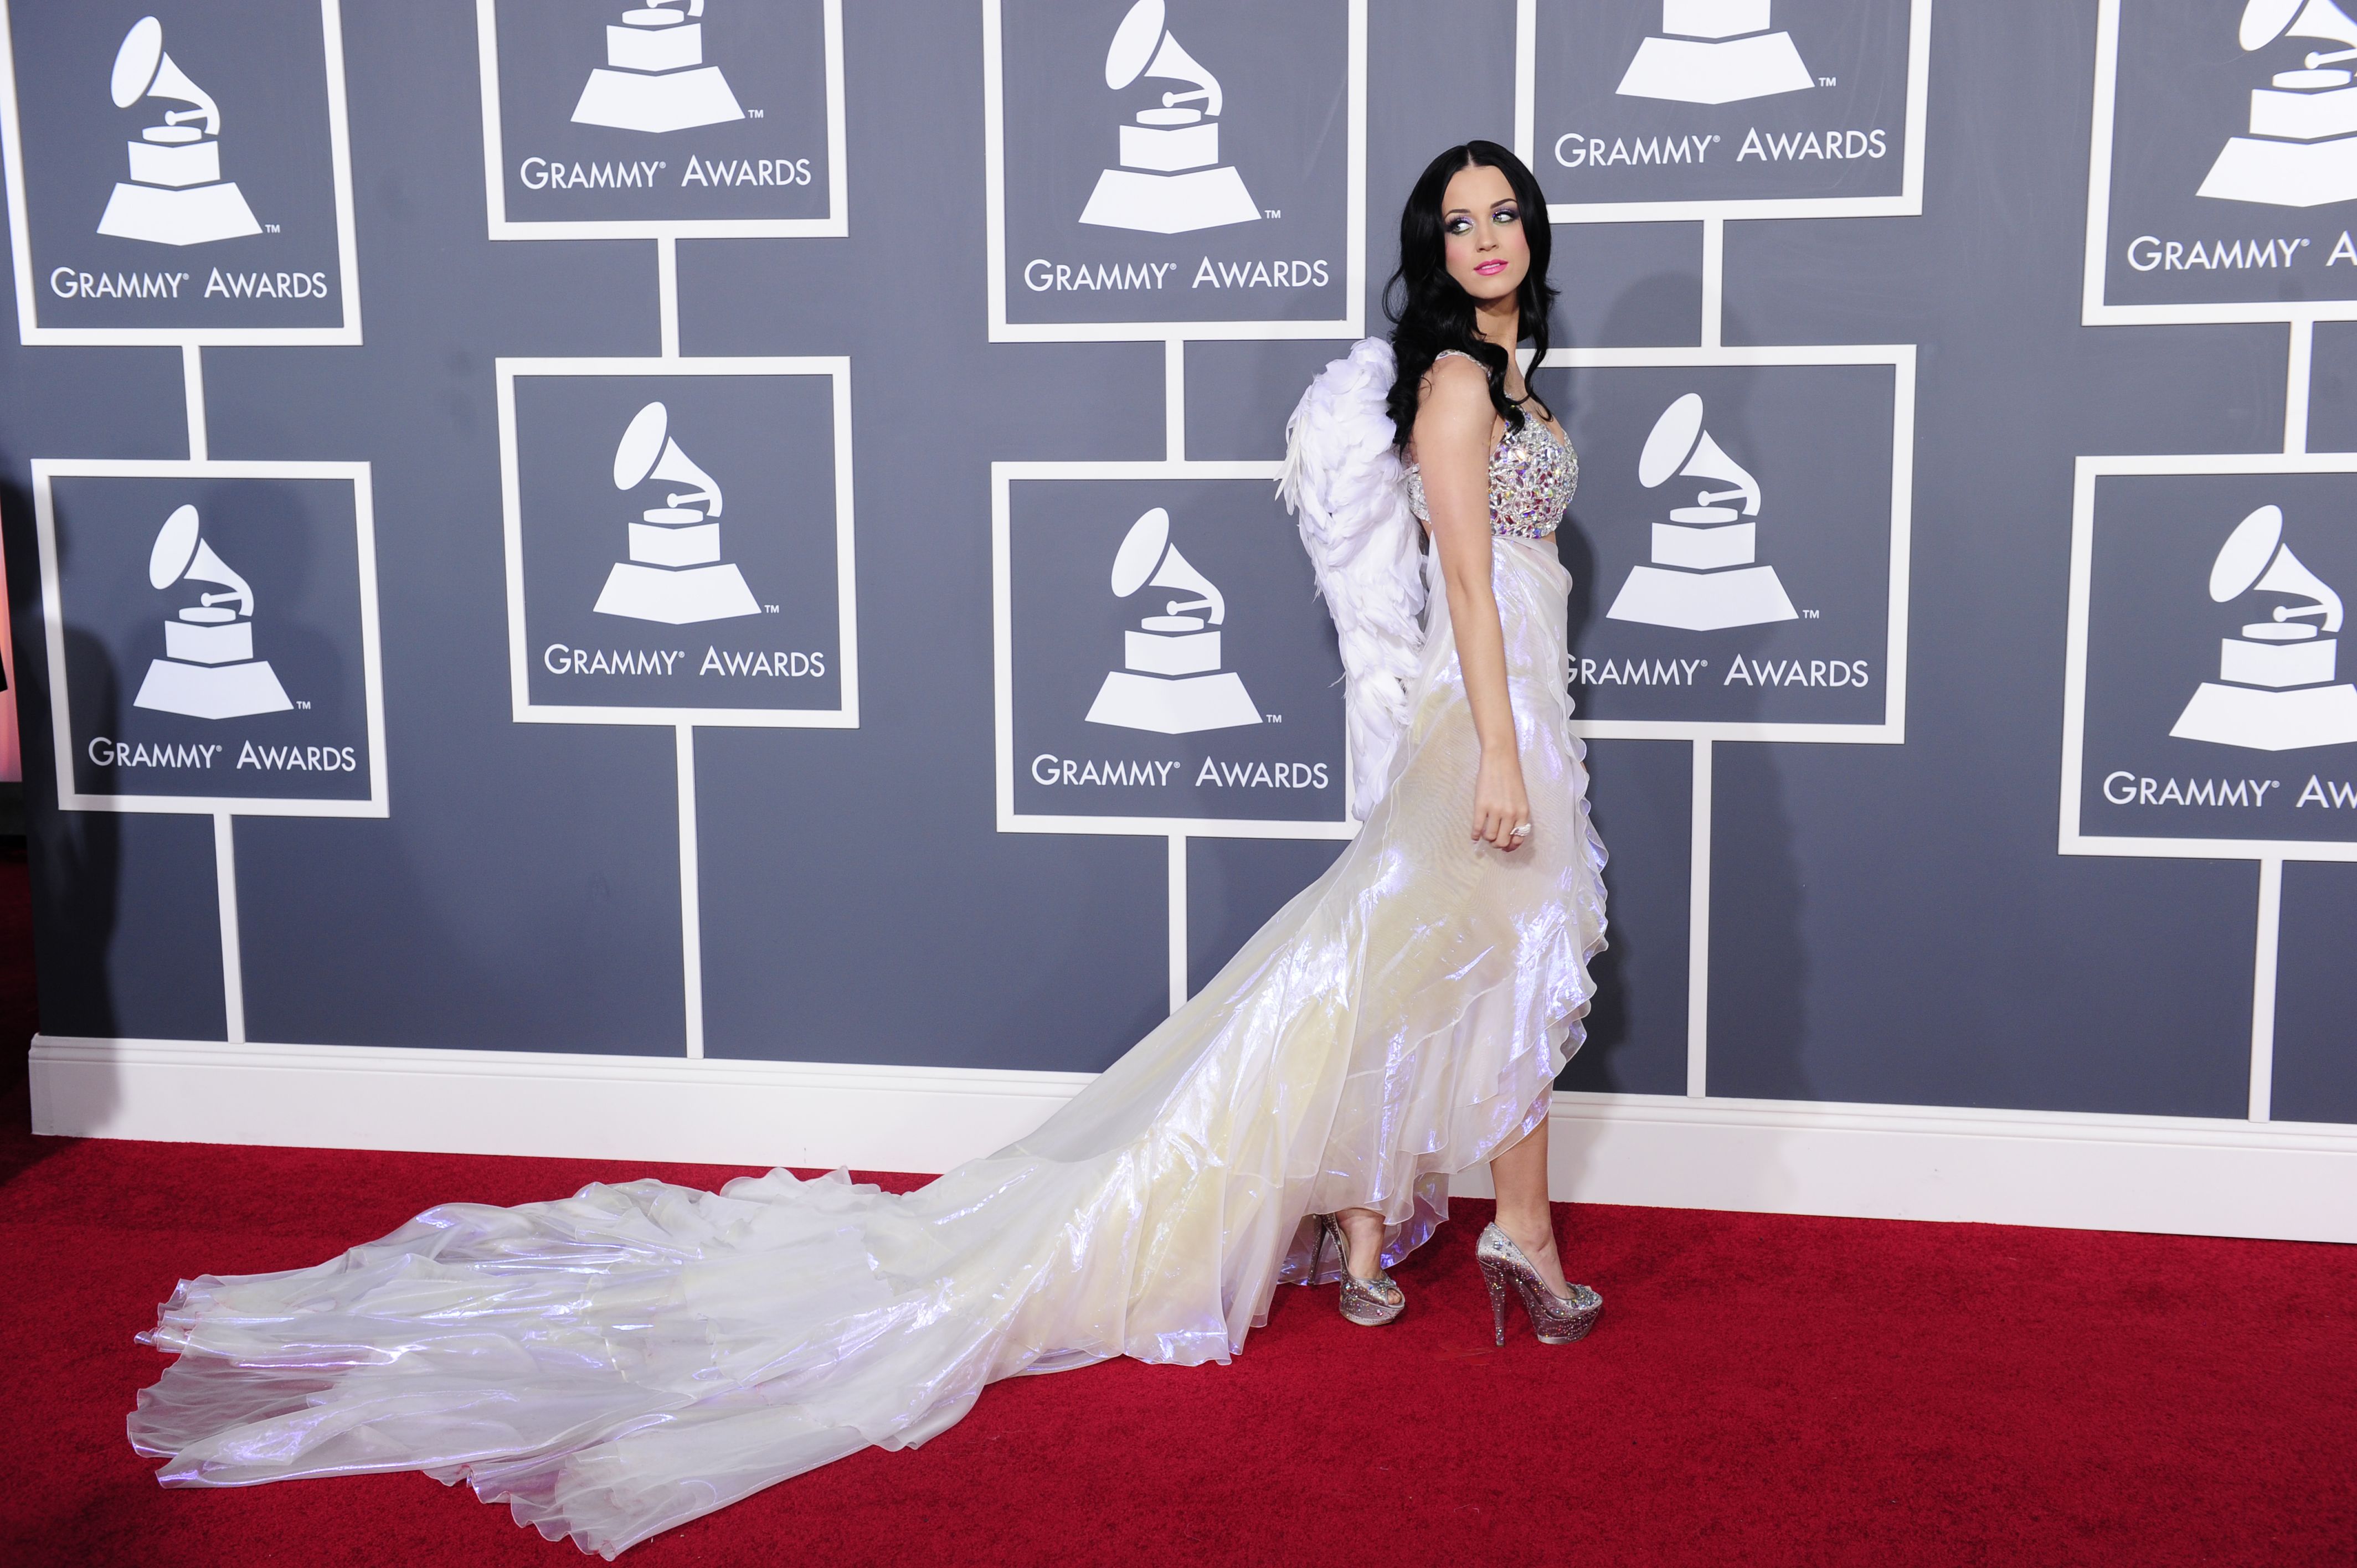 katy perry at the grammys 2011